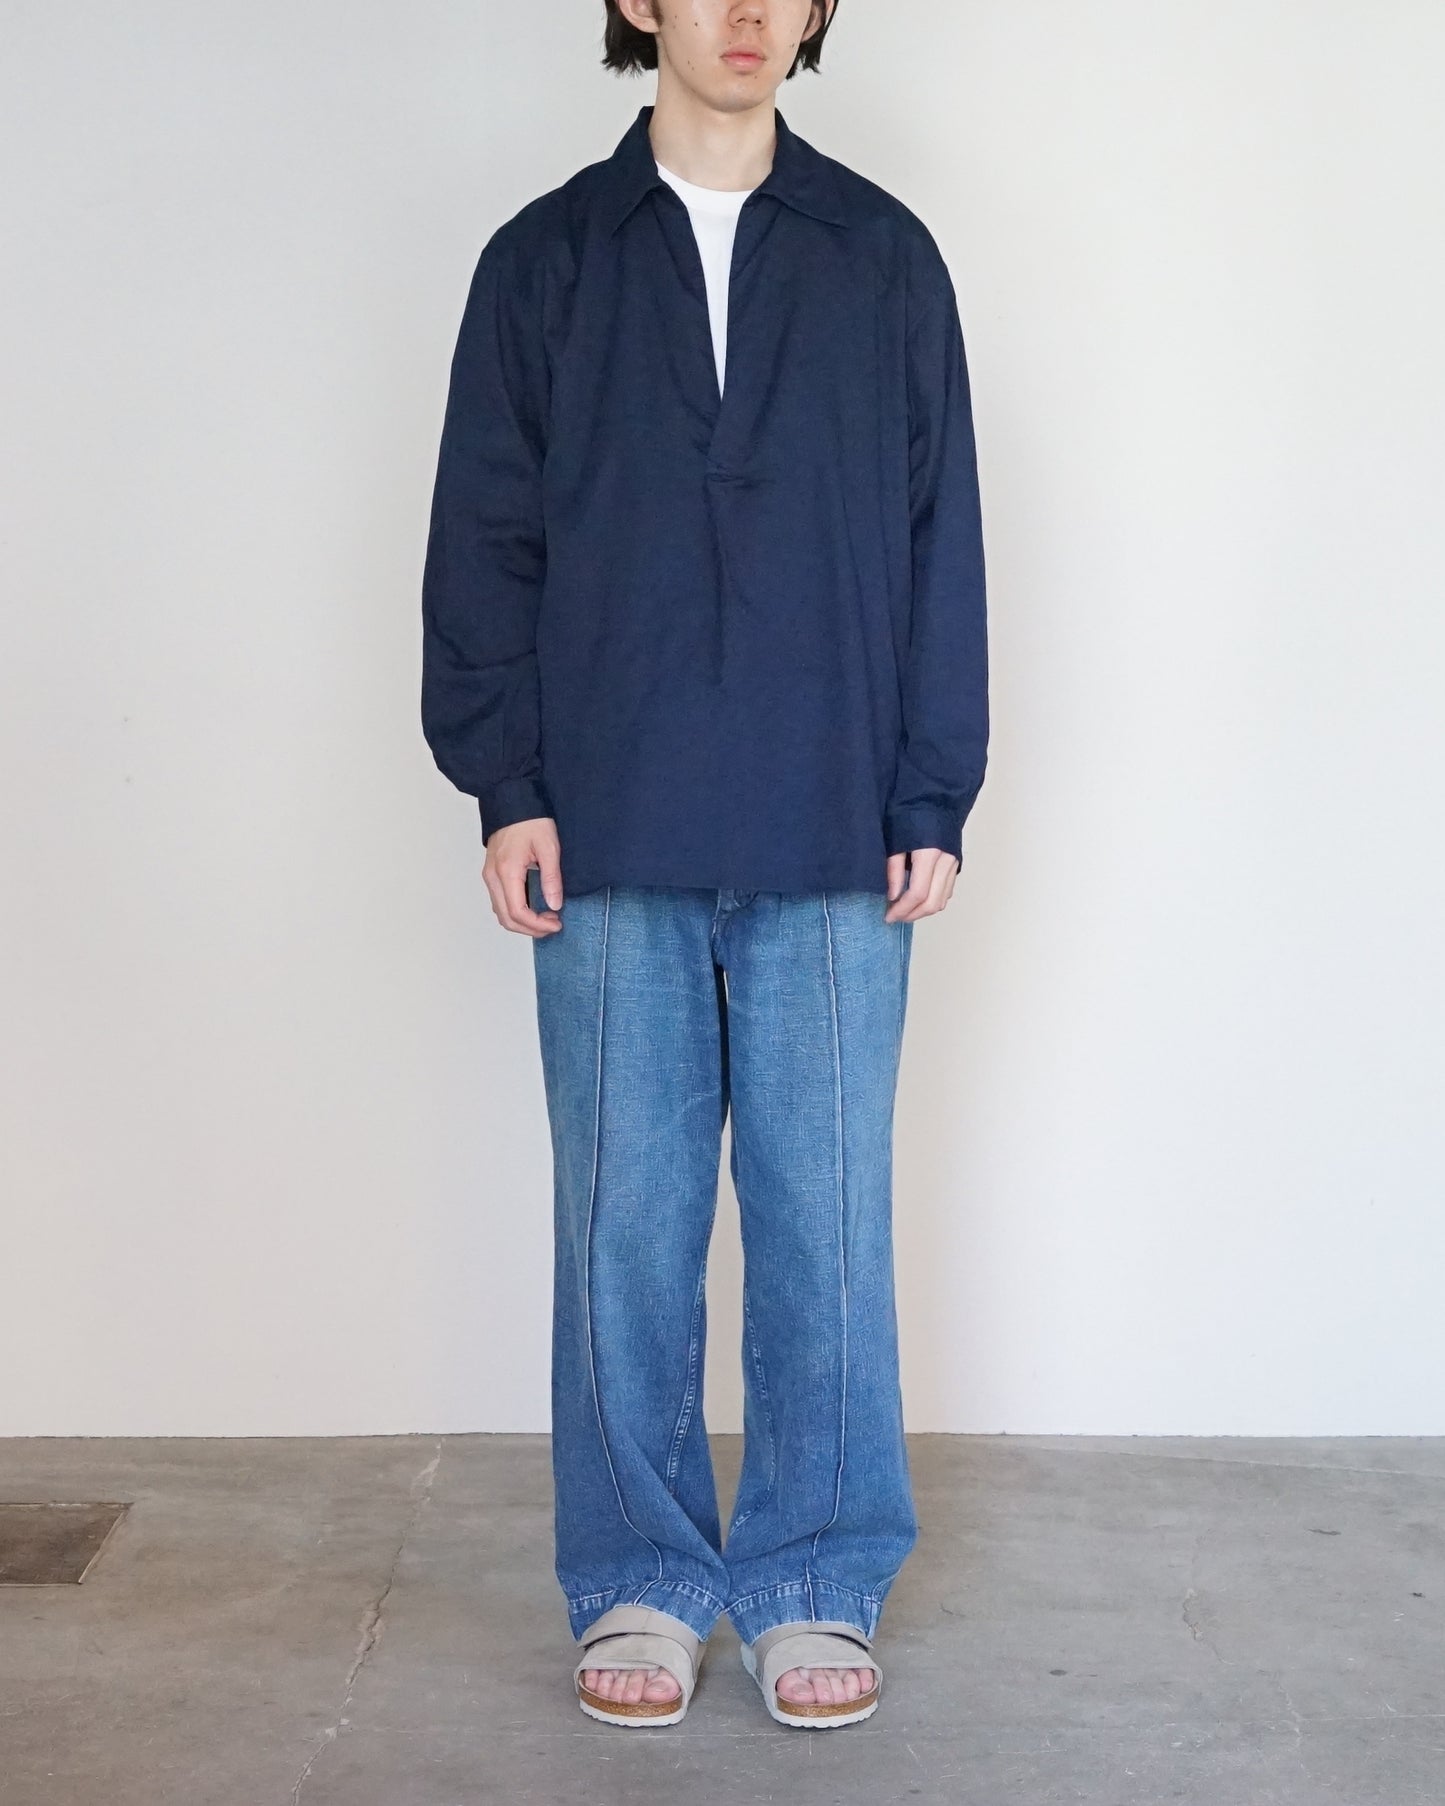 SOWBOW（蒼氓）FE/SKIPPERR（Exclusive for feets）"DK INDIGO"